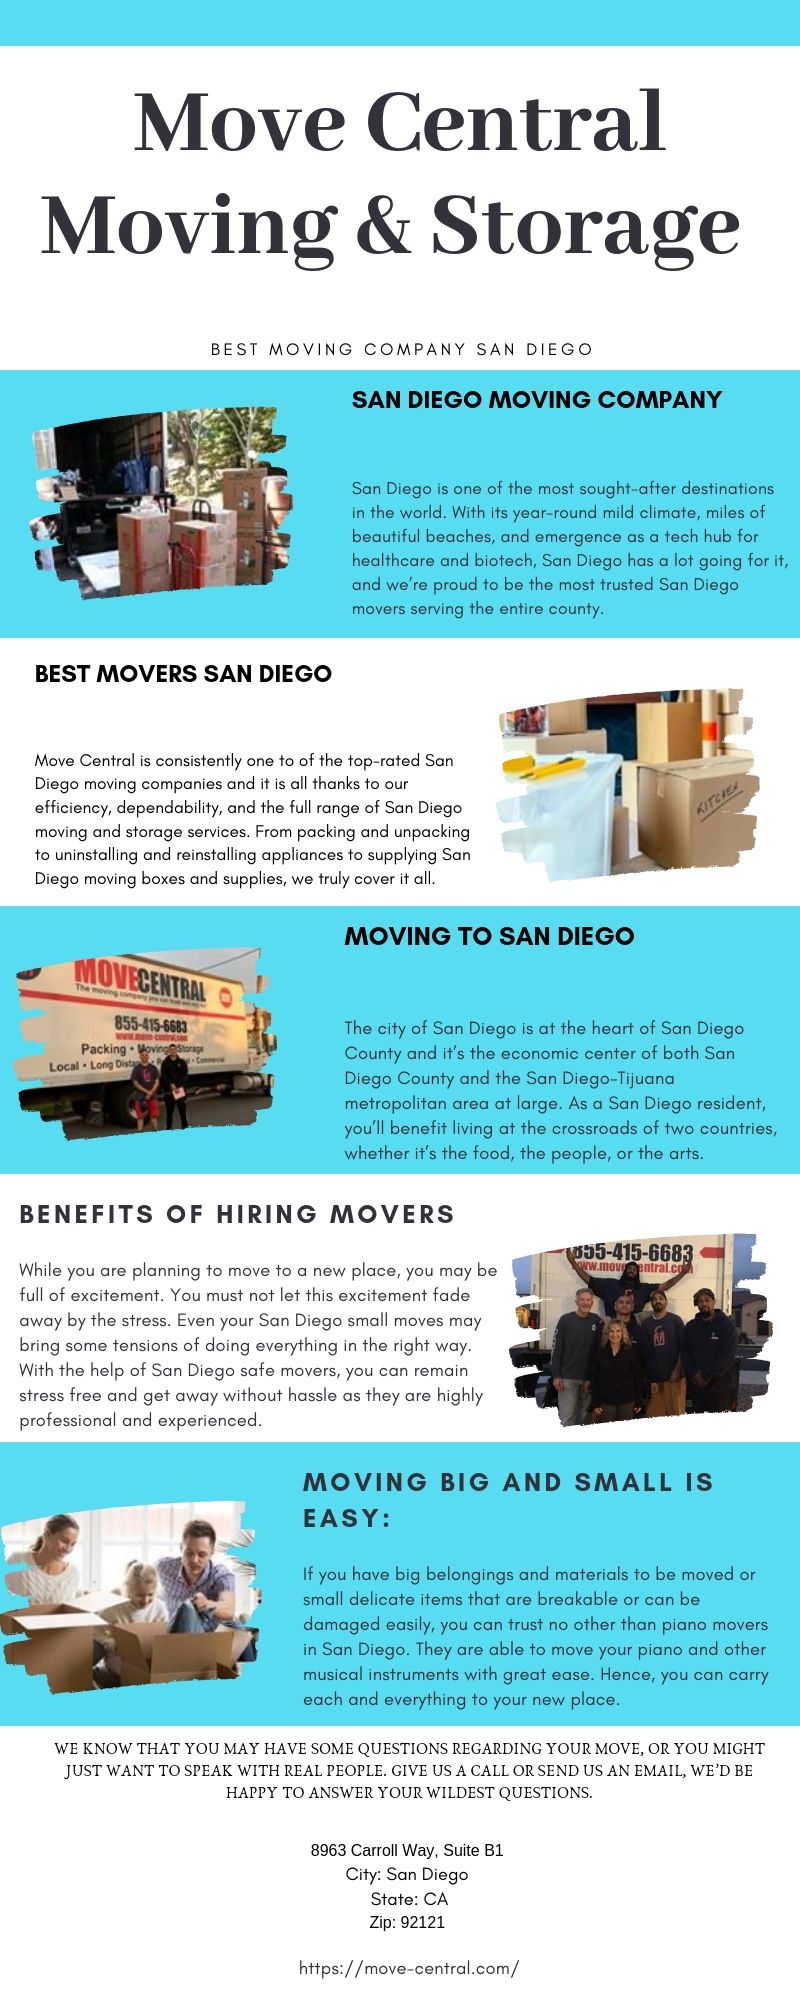 Moving Companies in San Diego.jpg  by Movecentral